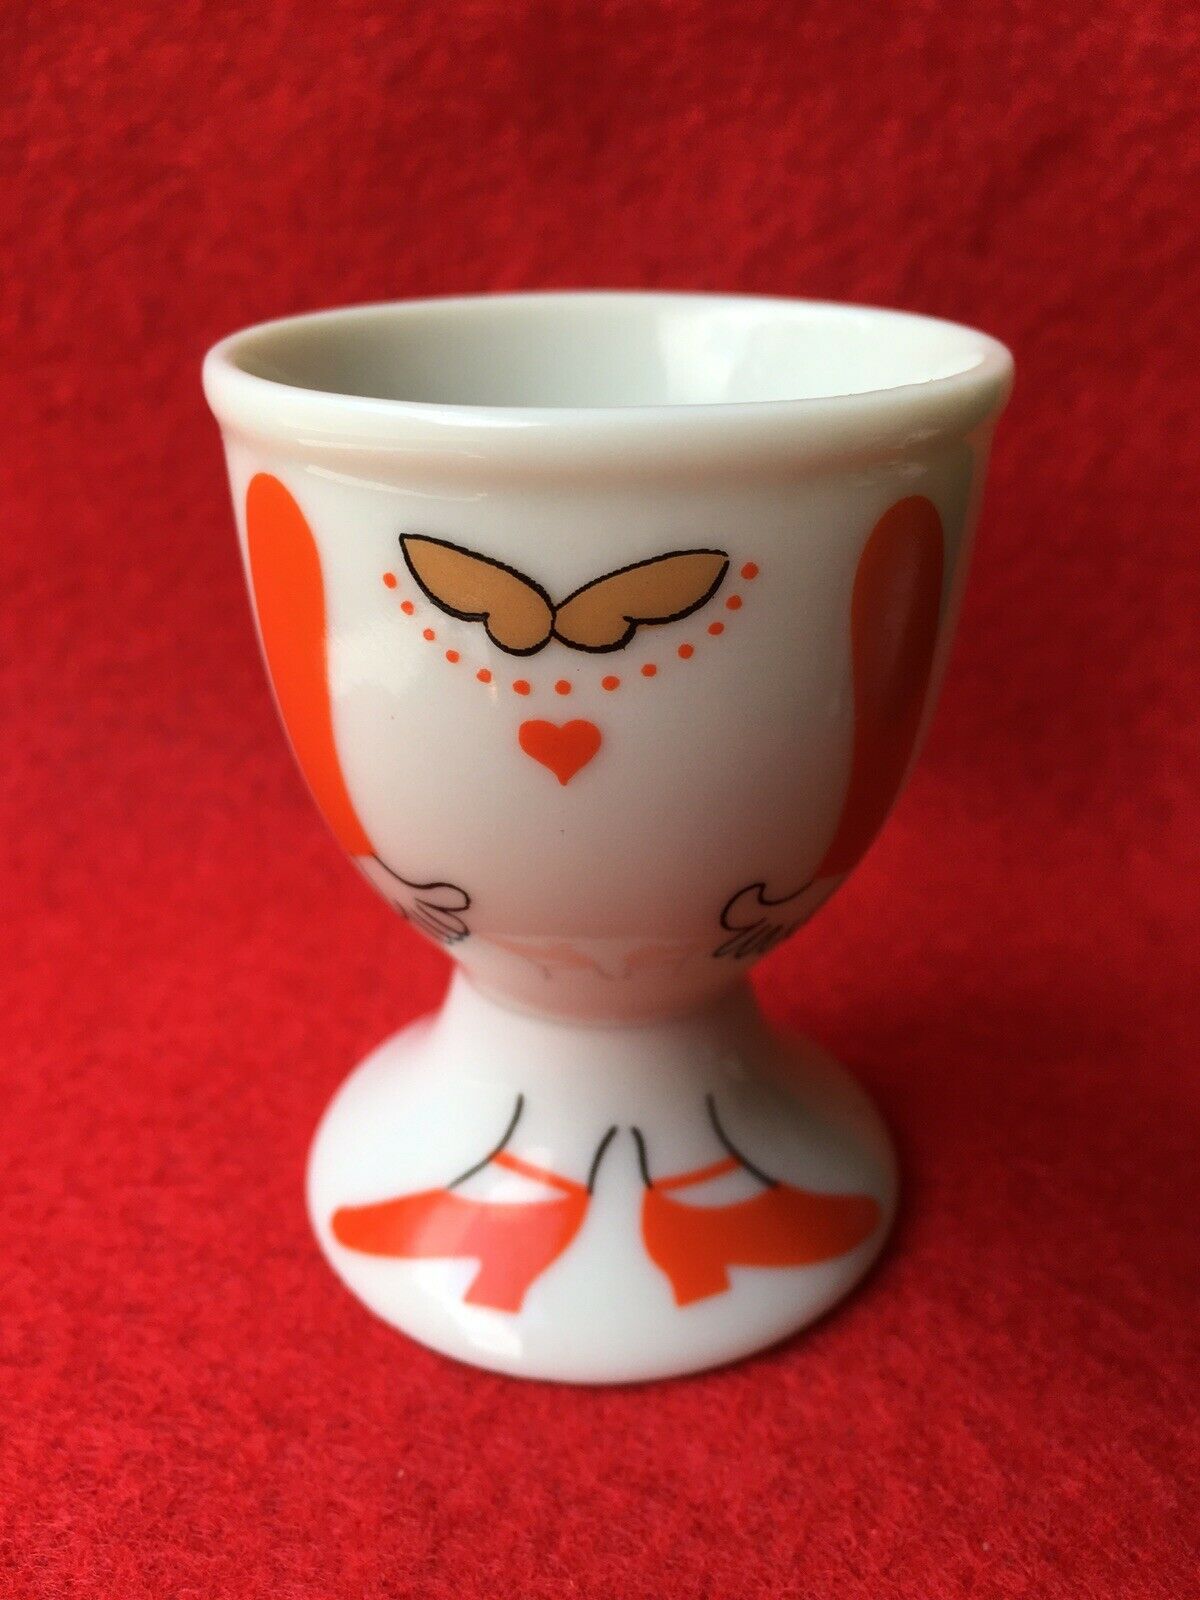 VINTAGE Egg Cup Ceramic Made In Japan Egg In Orange Suit Collectible